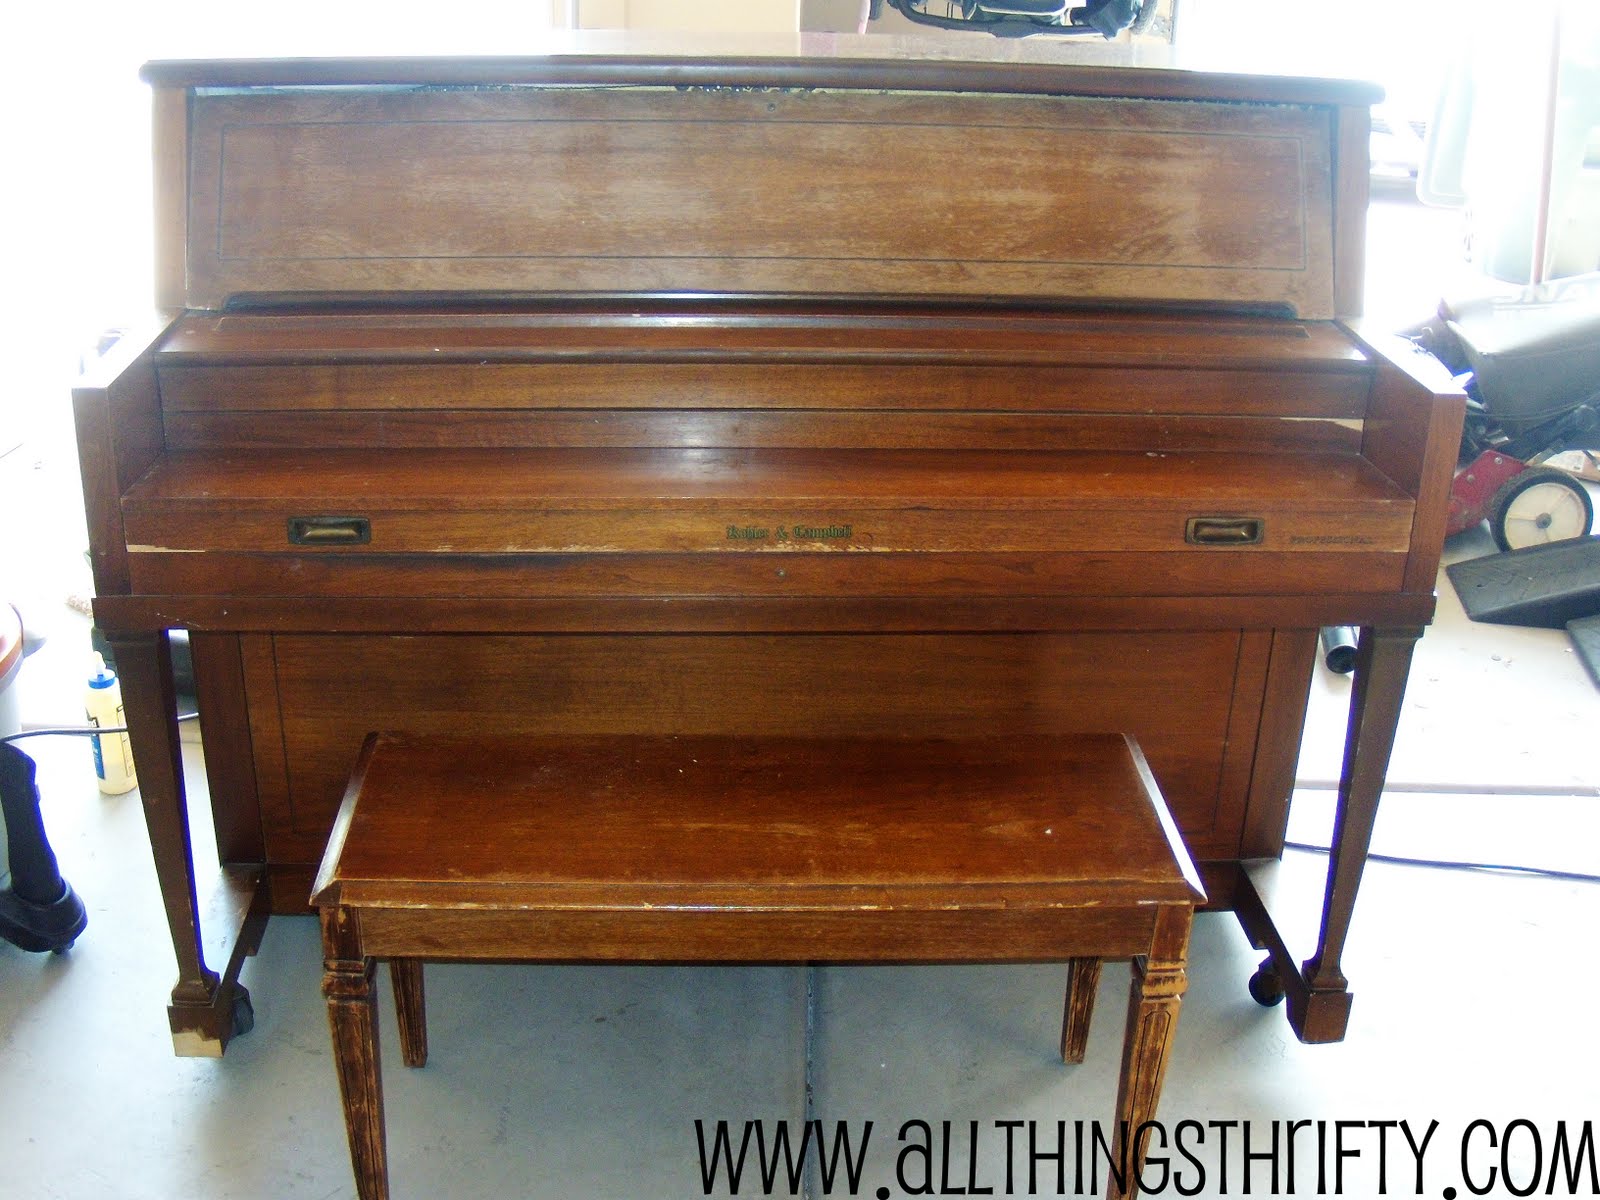 Piano Refinishing 101 | All Things Thrifty